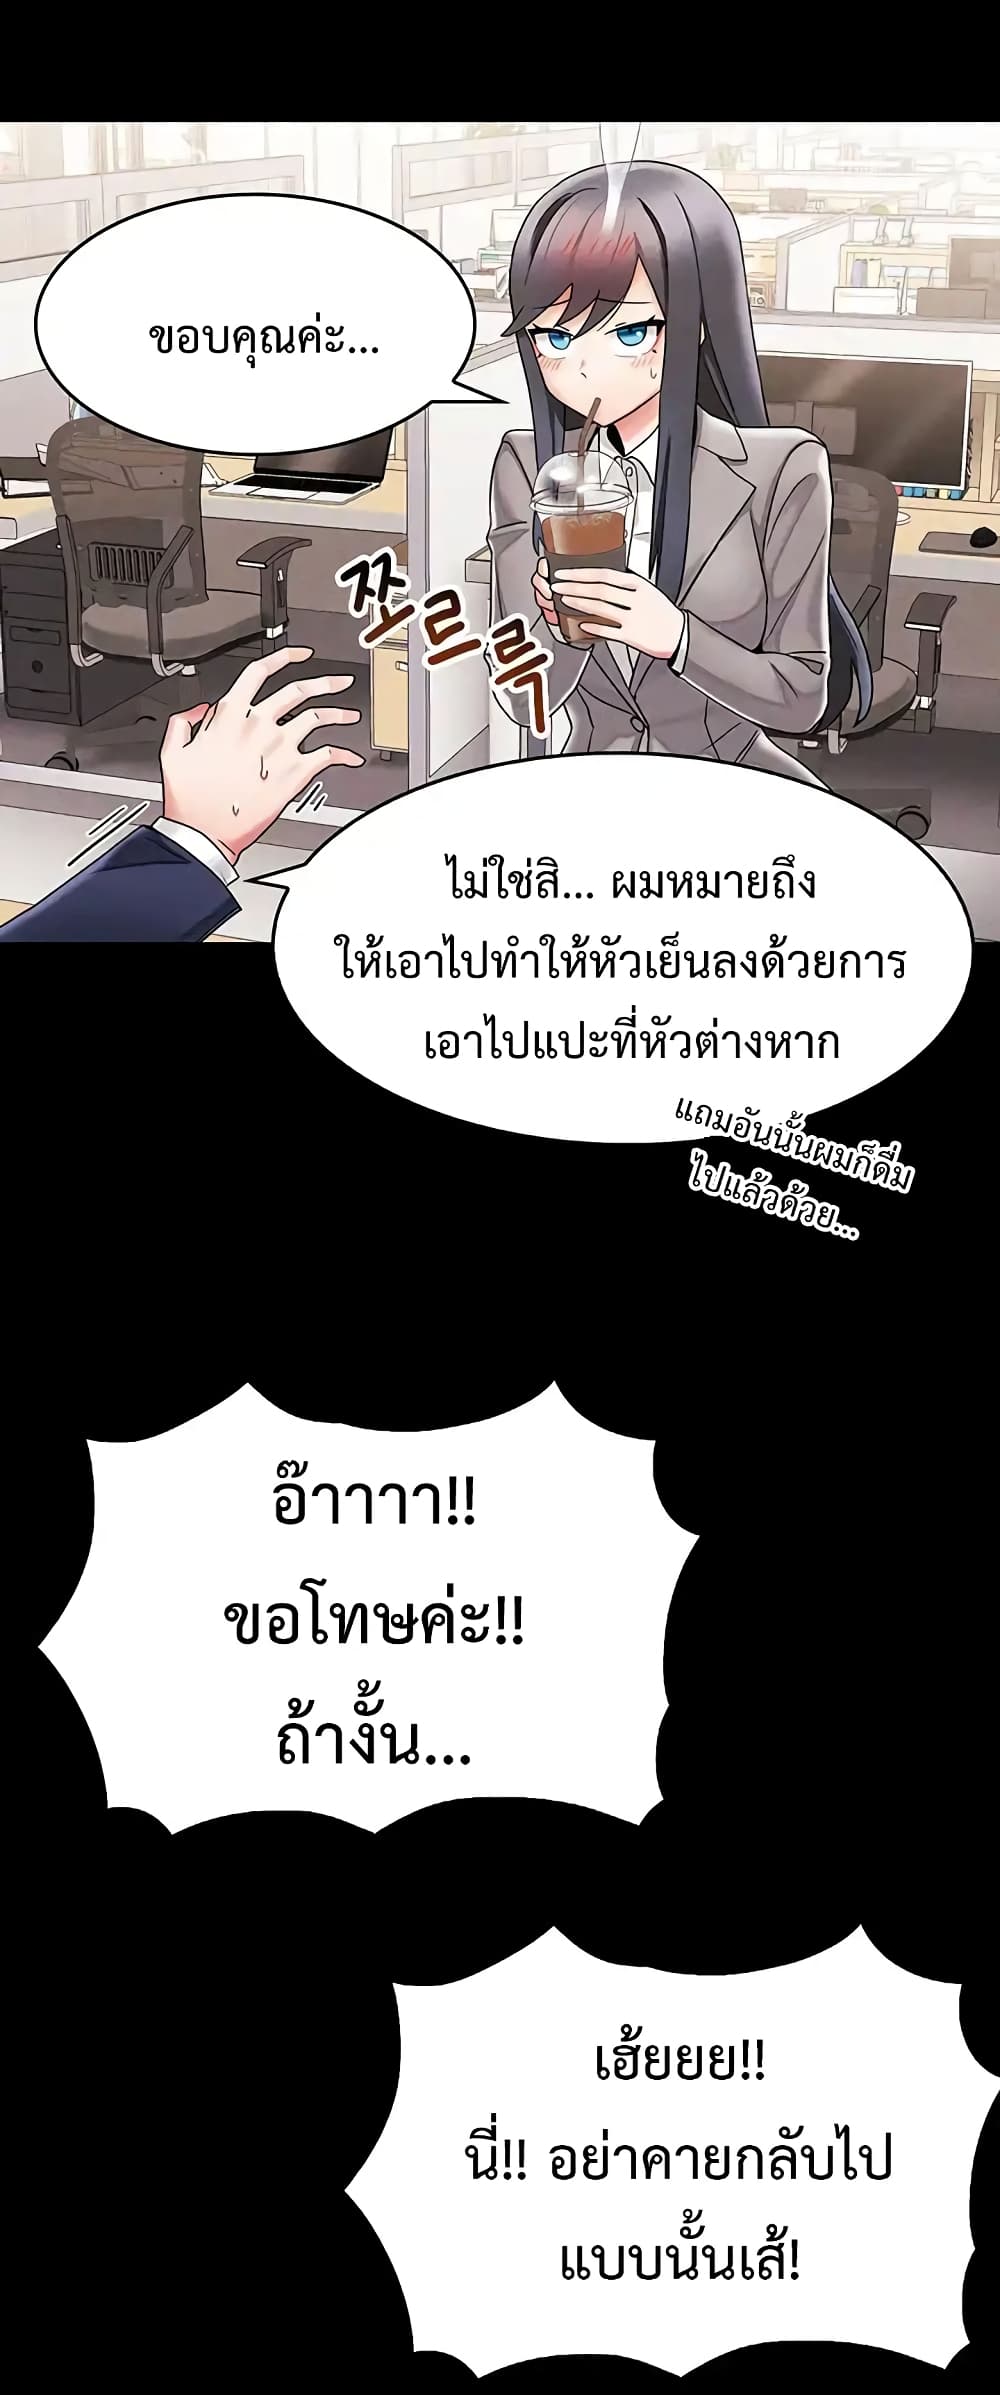 Relationship Reverse Button: Let’s Make Her Submissive 1 ภาพที่ 20